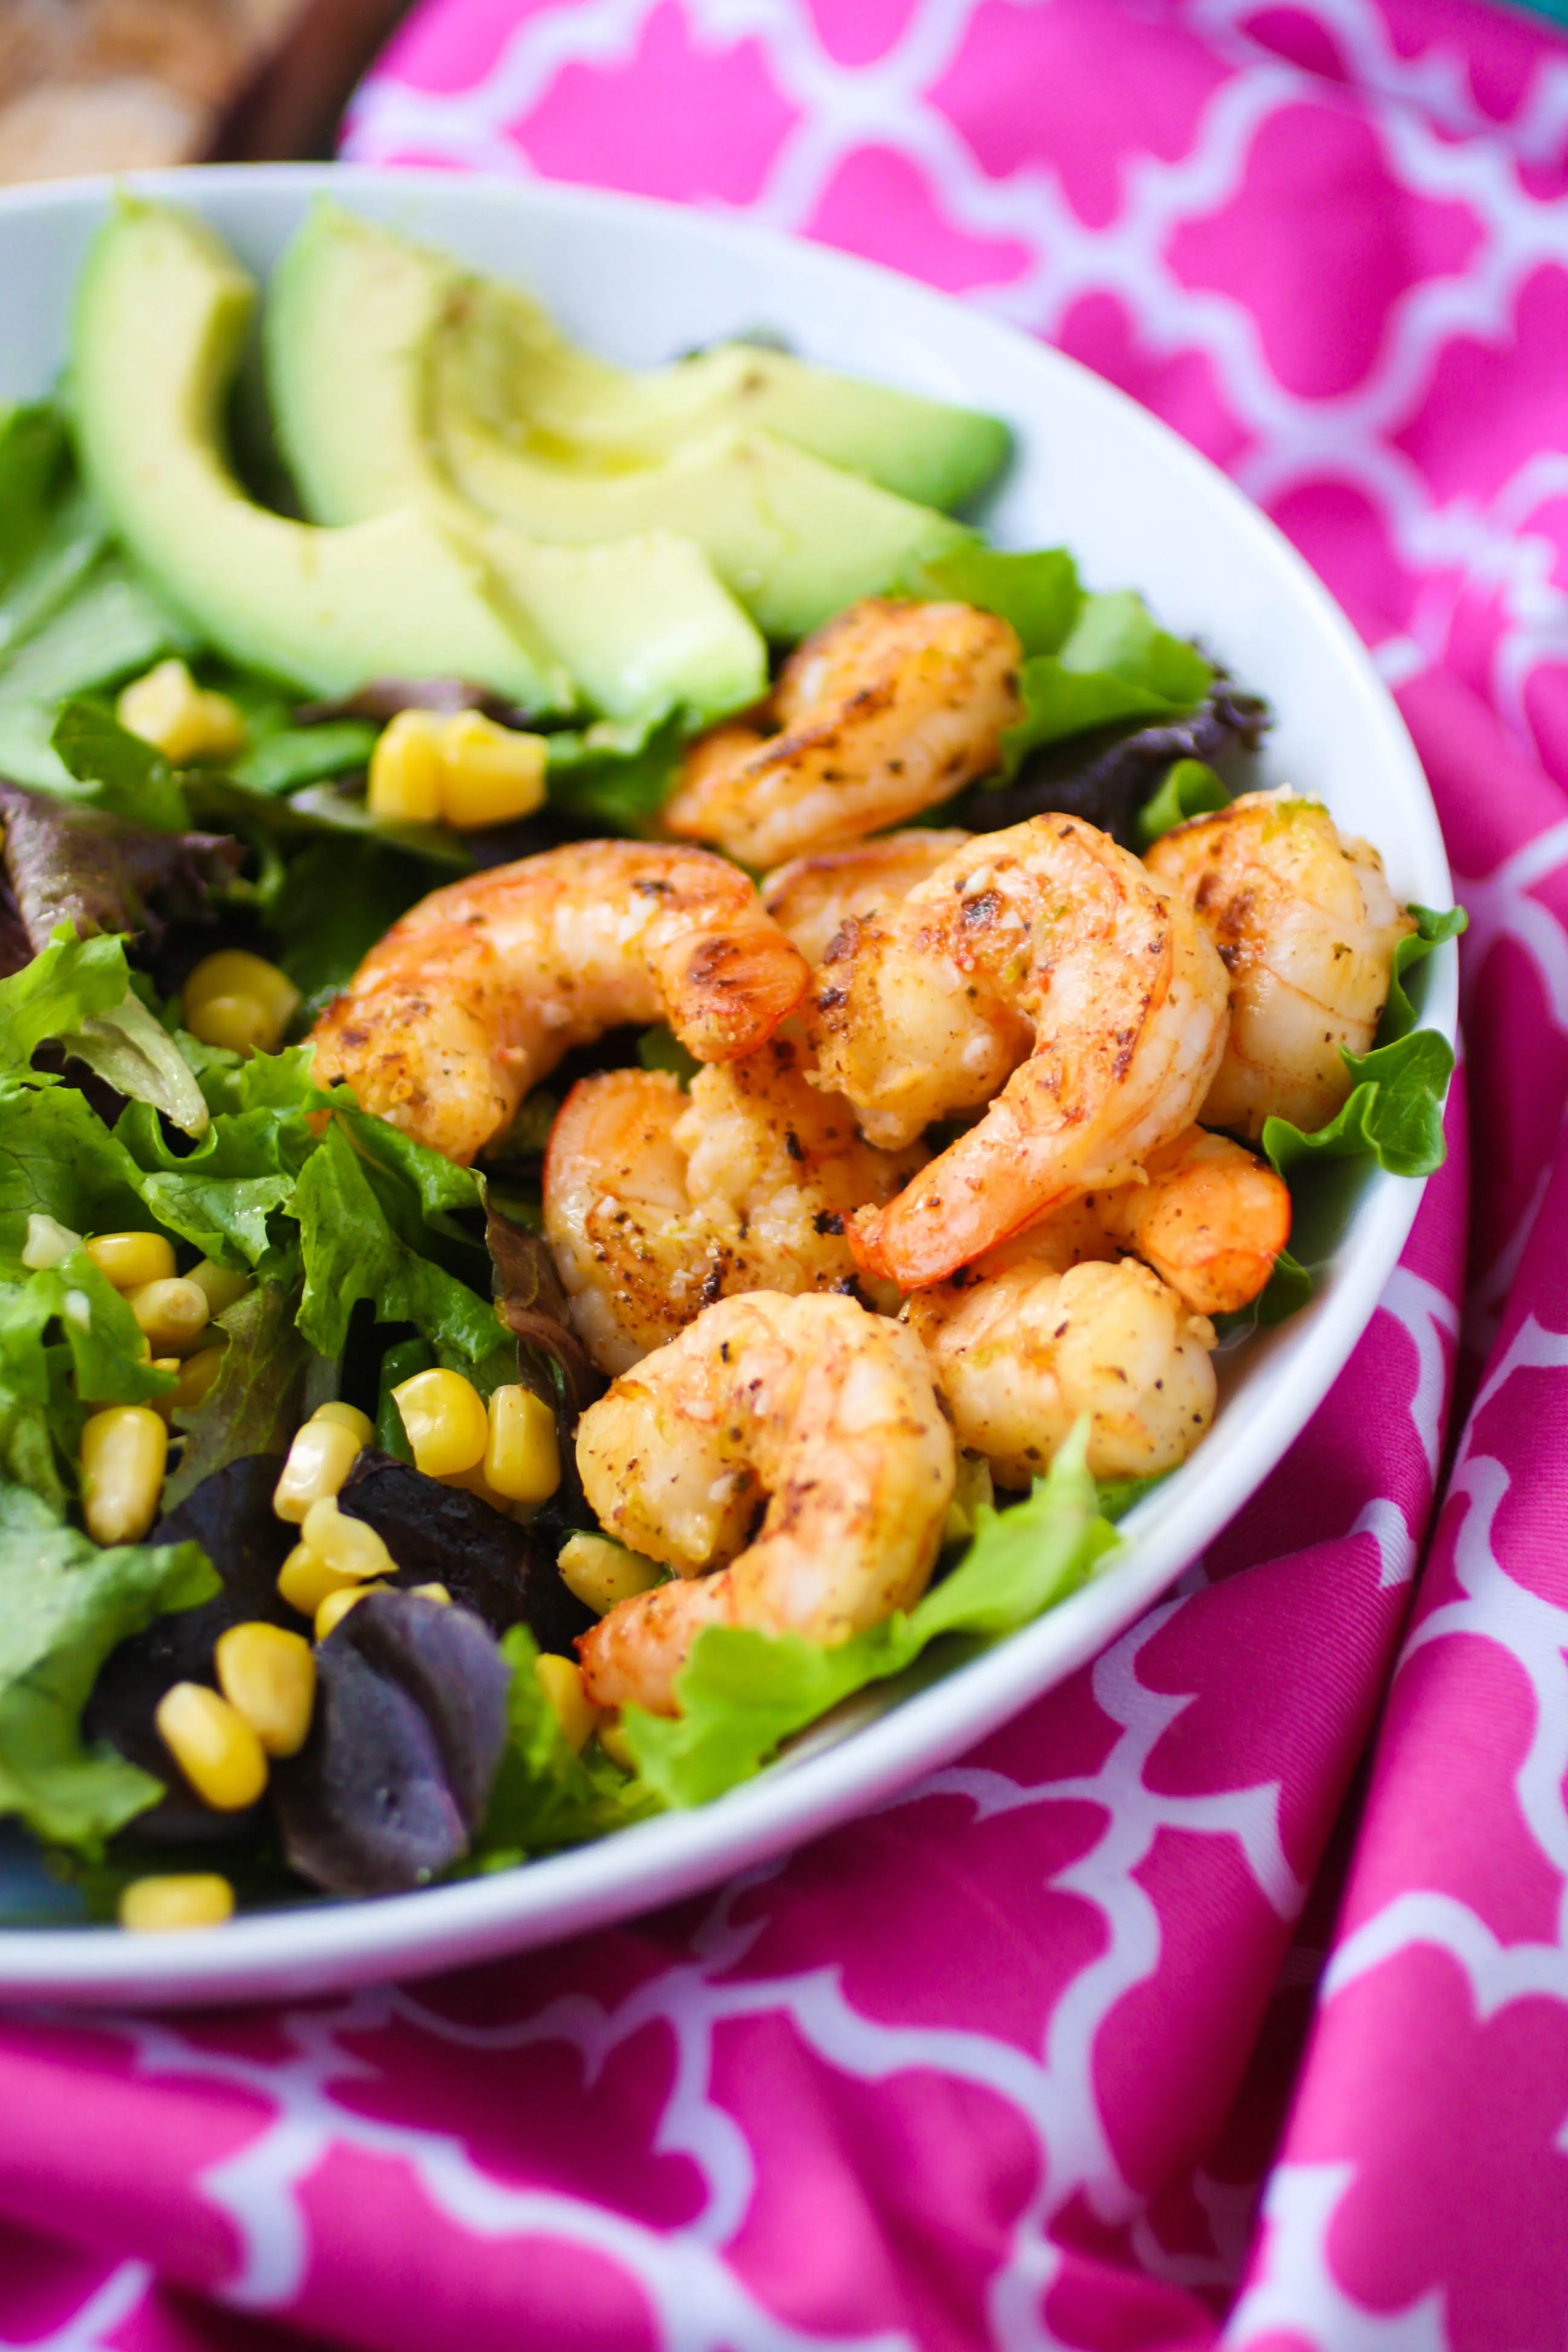 Simple Skillet Shrimp Salad with Lime Vinaigrette is a simple salad that's delicious! Make Simple Skillet Shrimp Salad with Lime Vinaigrette for your next meal.